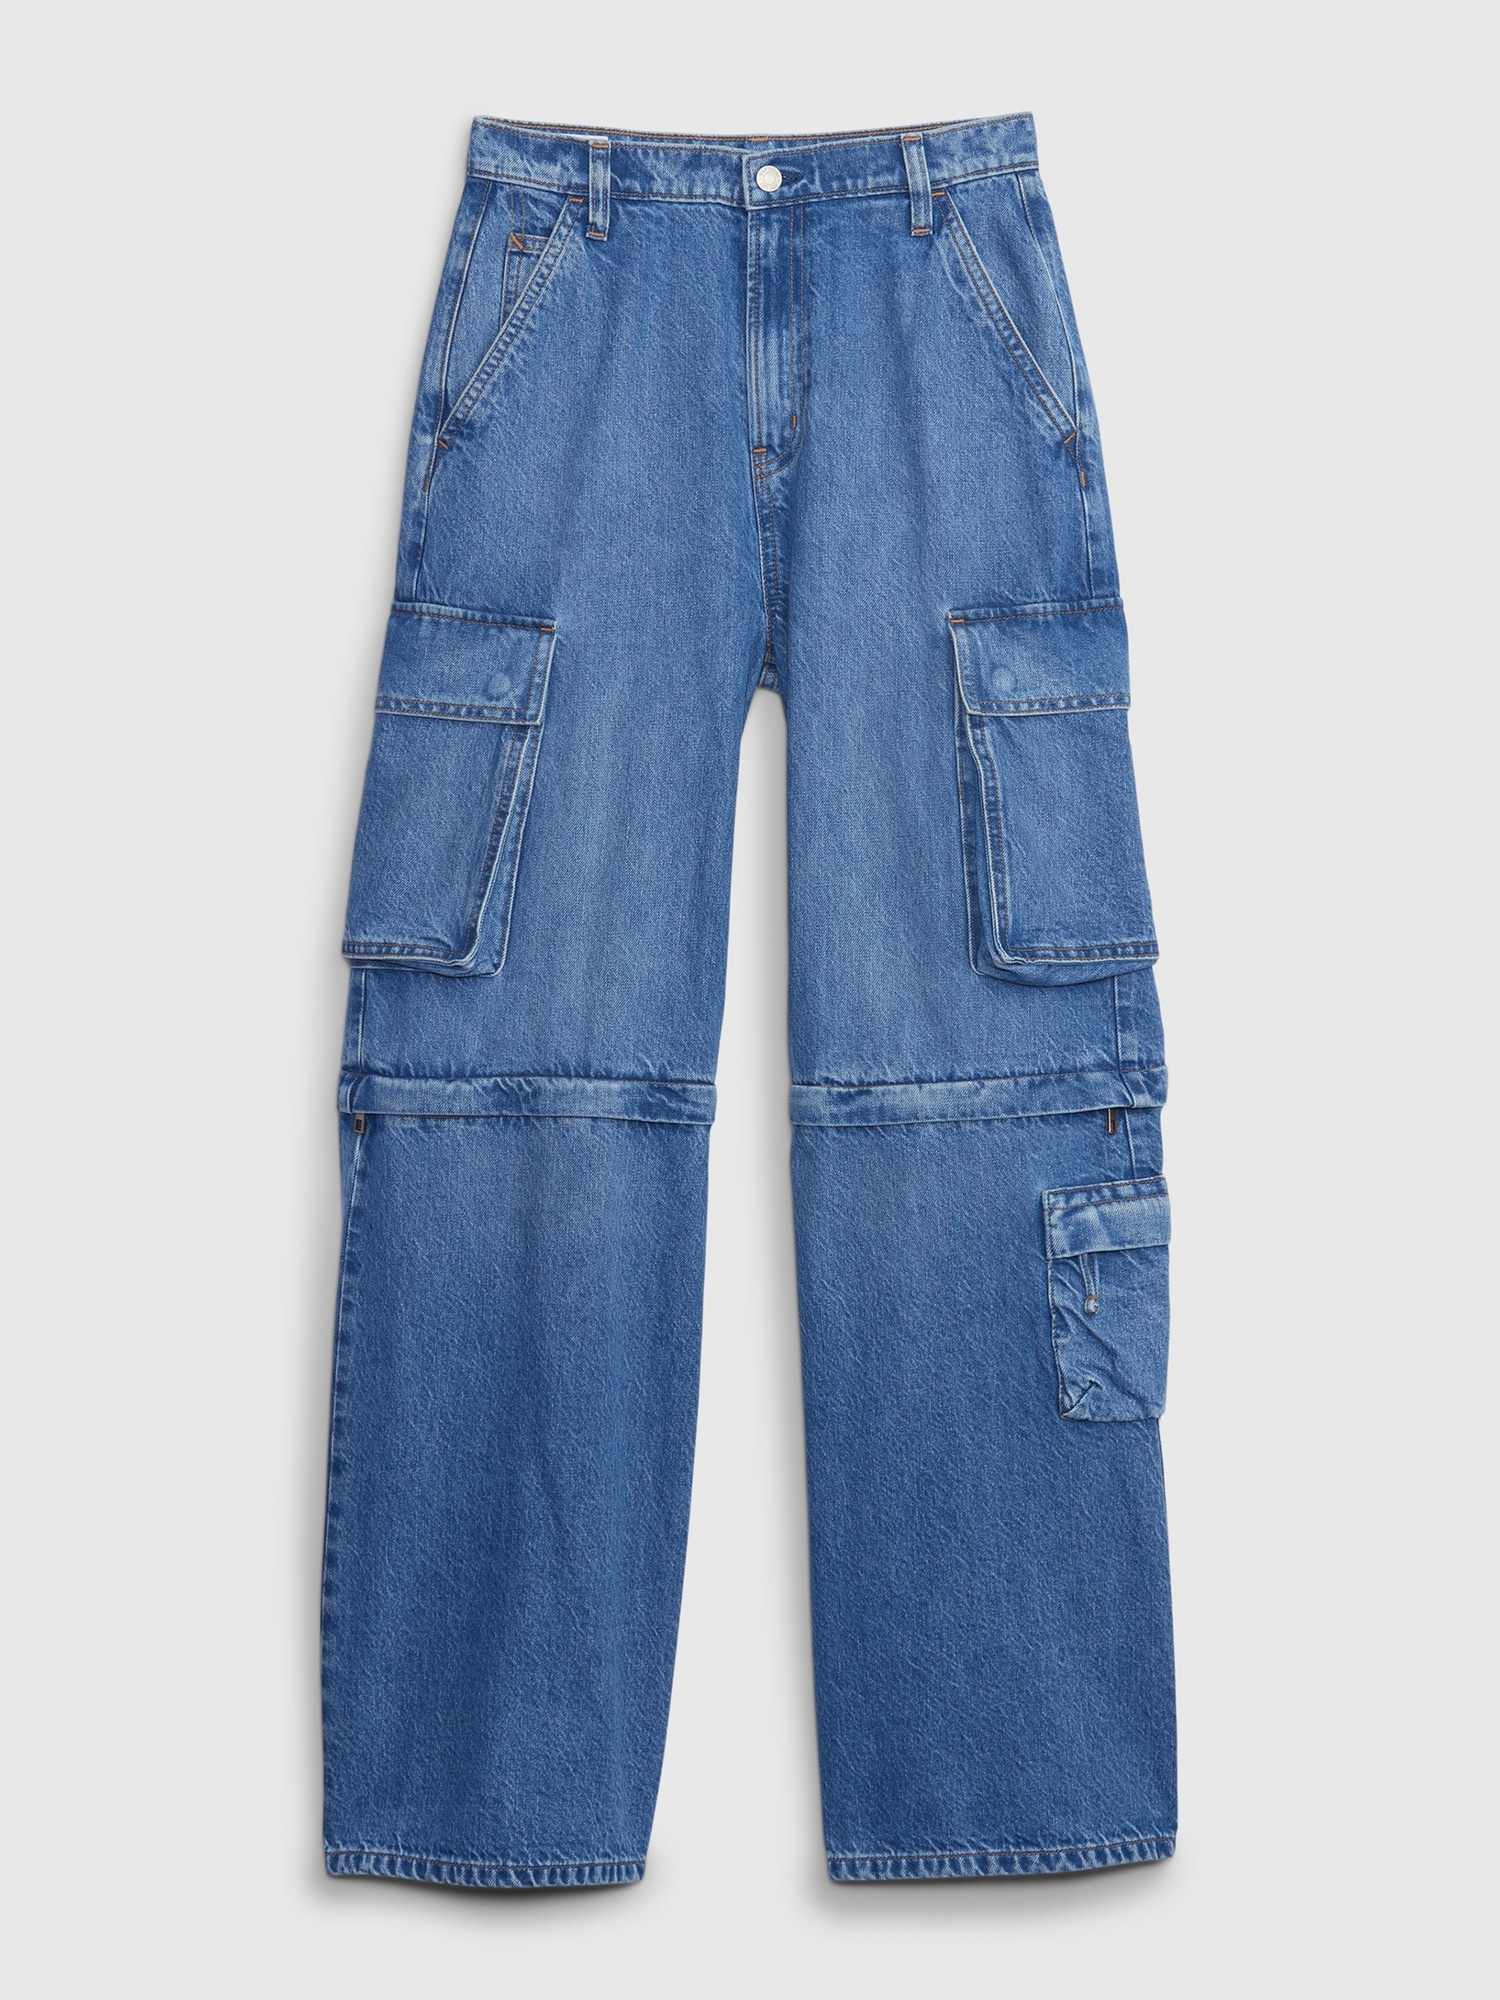 PROJECT GAP Sky High Rise Wide Baggy Cargo Jeans with Washwell | Gap